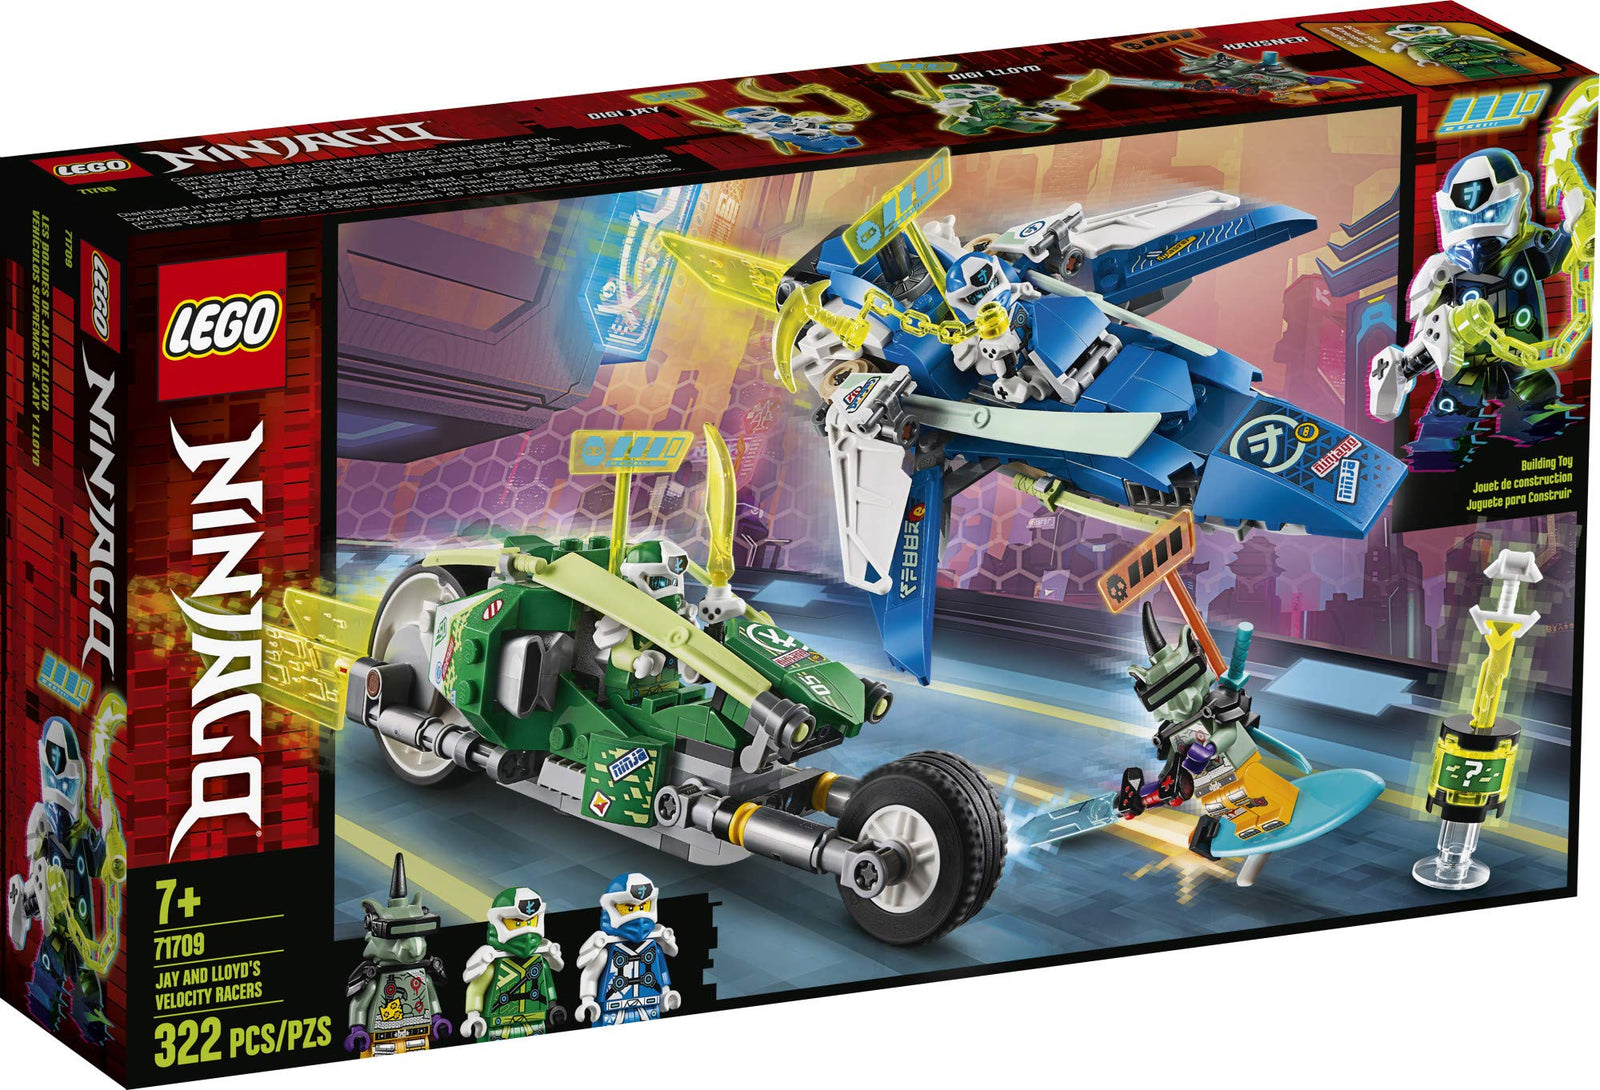 LEGO NINJAGO Jay and Lloyd’s Velocity Racers 71709 Building Kit for Kids and Hot Toys (322 Pieces)